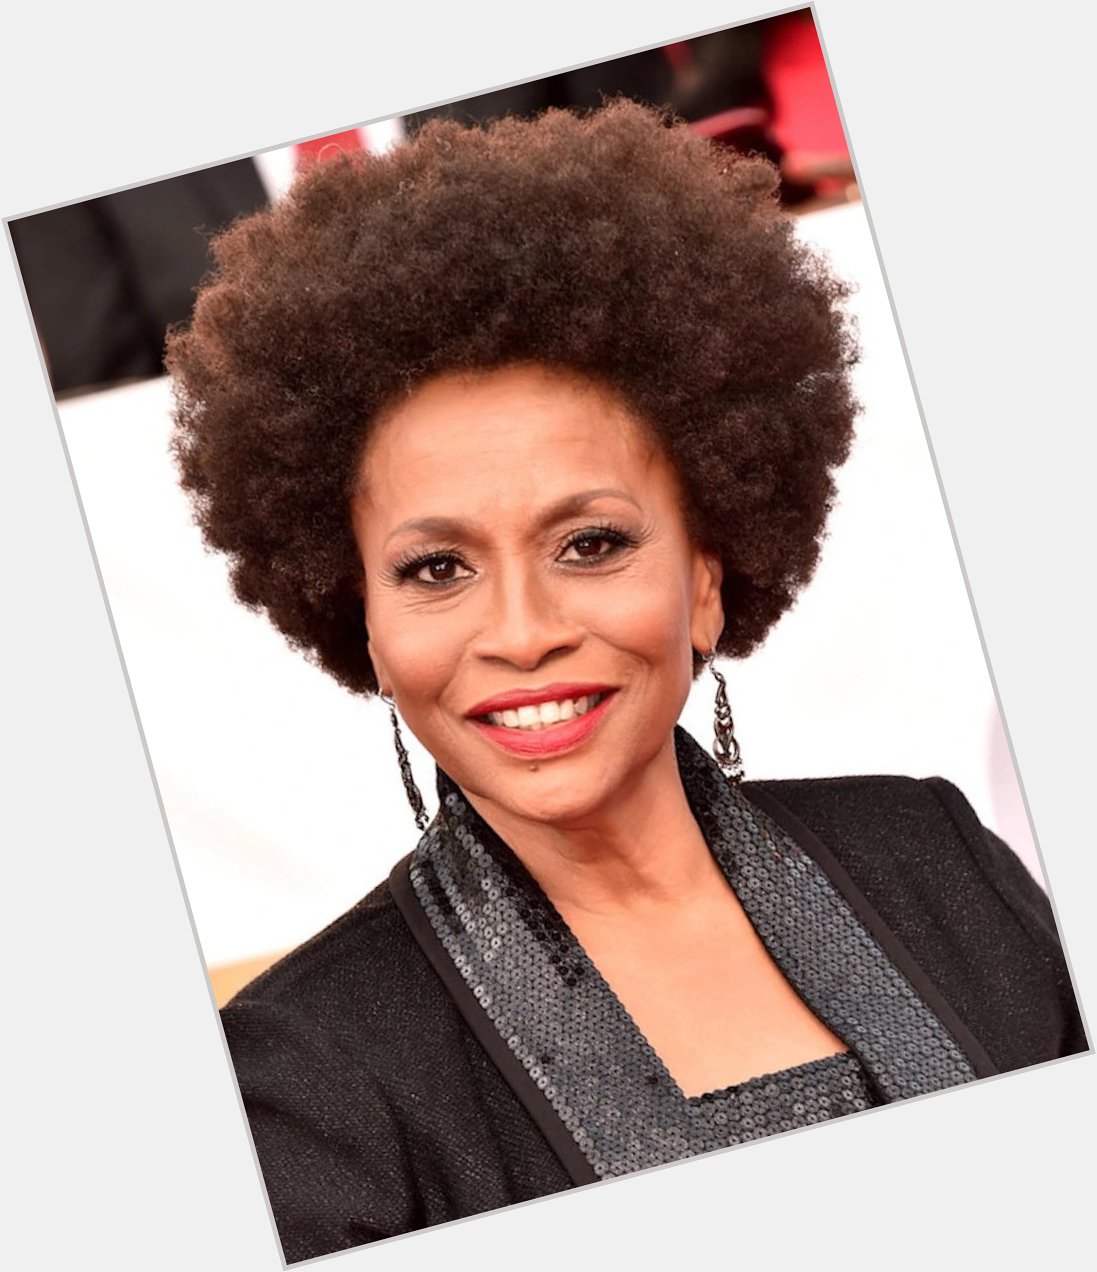 Happy Birthday to the one and only Jenifer Lewis! 